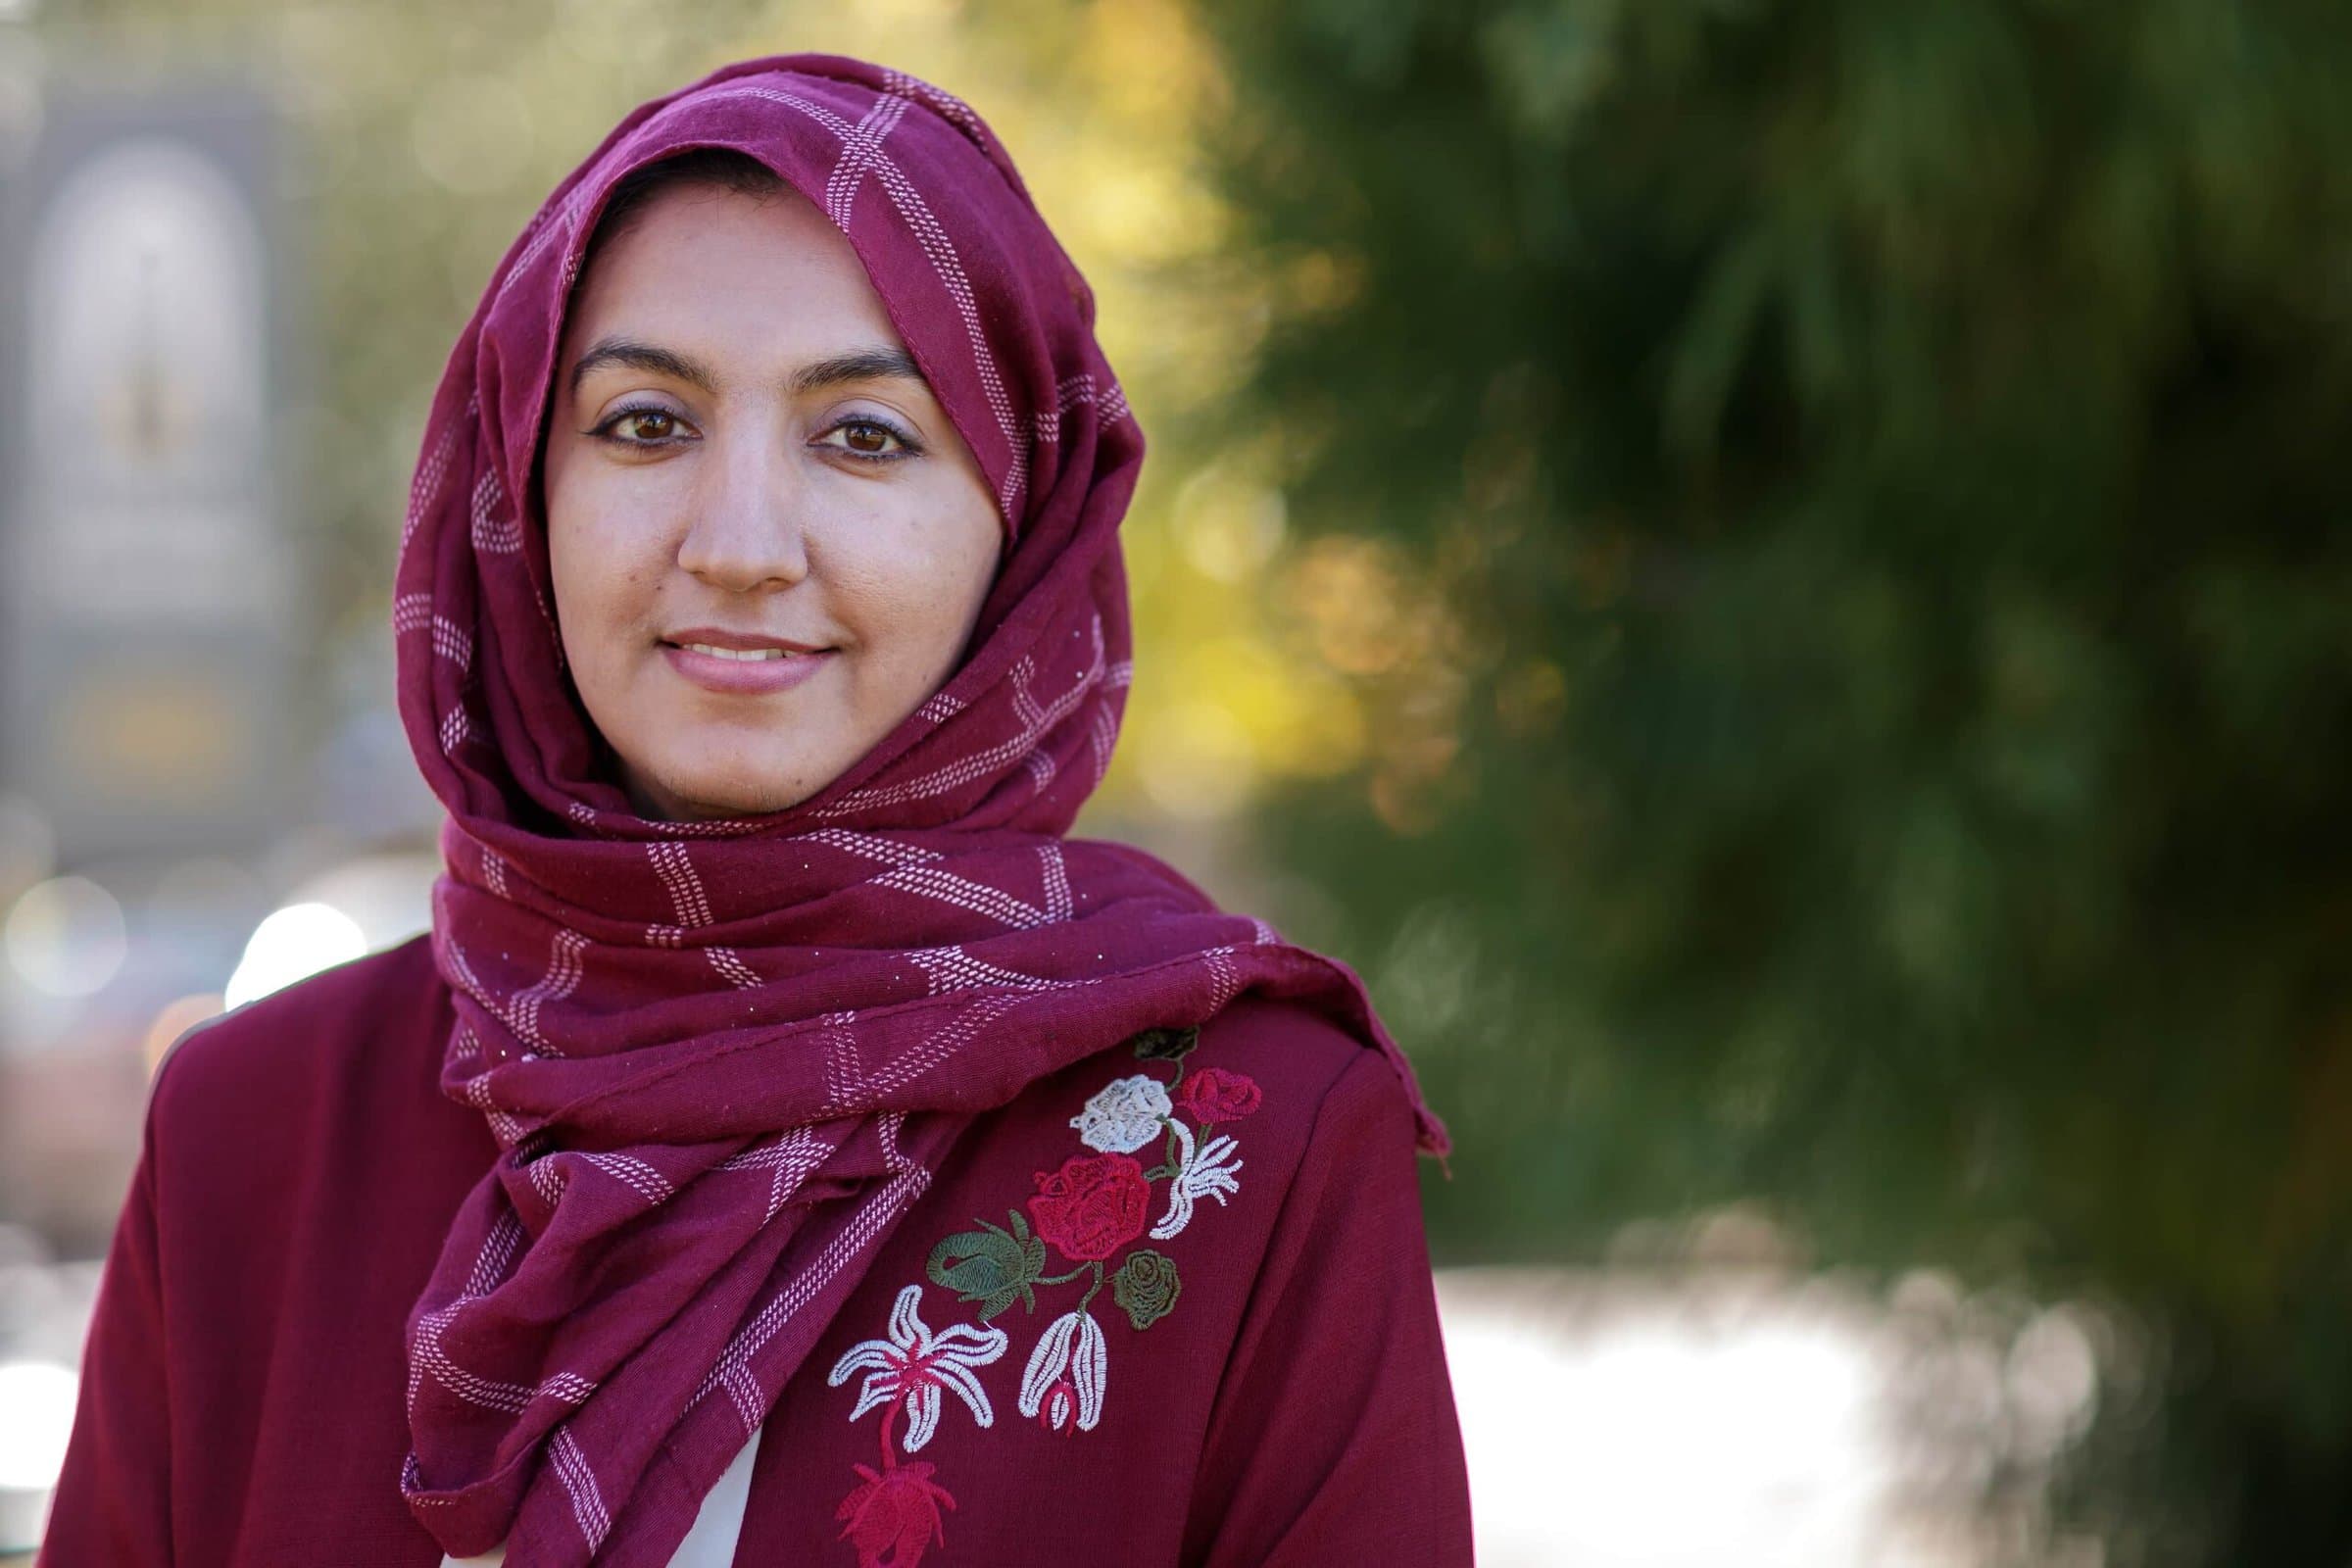 Maryem, a Women's College alumna from Afghanistan, who returned to Brenau to speak with current students and share her story. (AJ Reynolds/Brenau University)